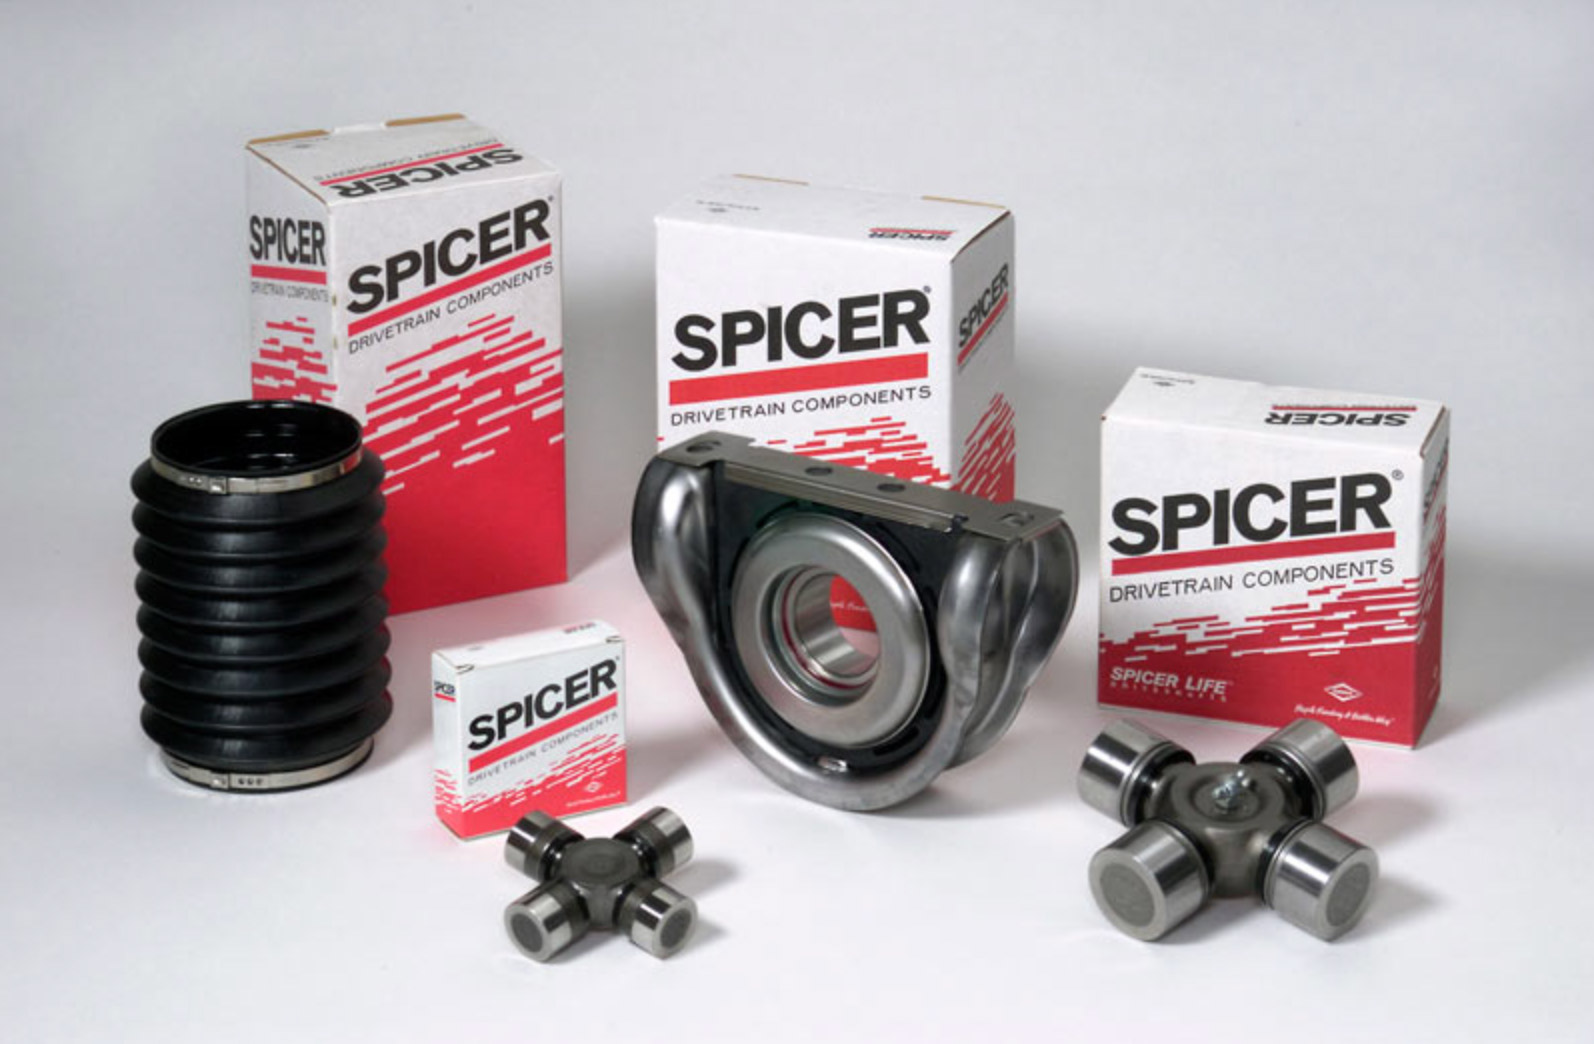 Spicer driveshaft products